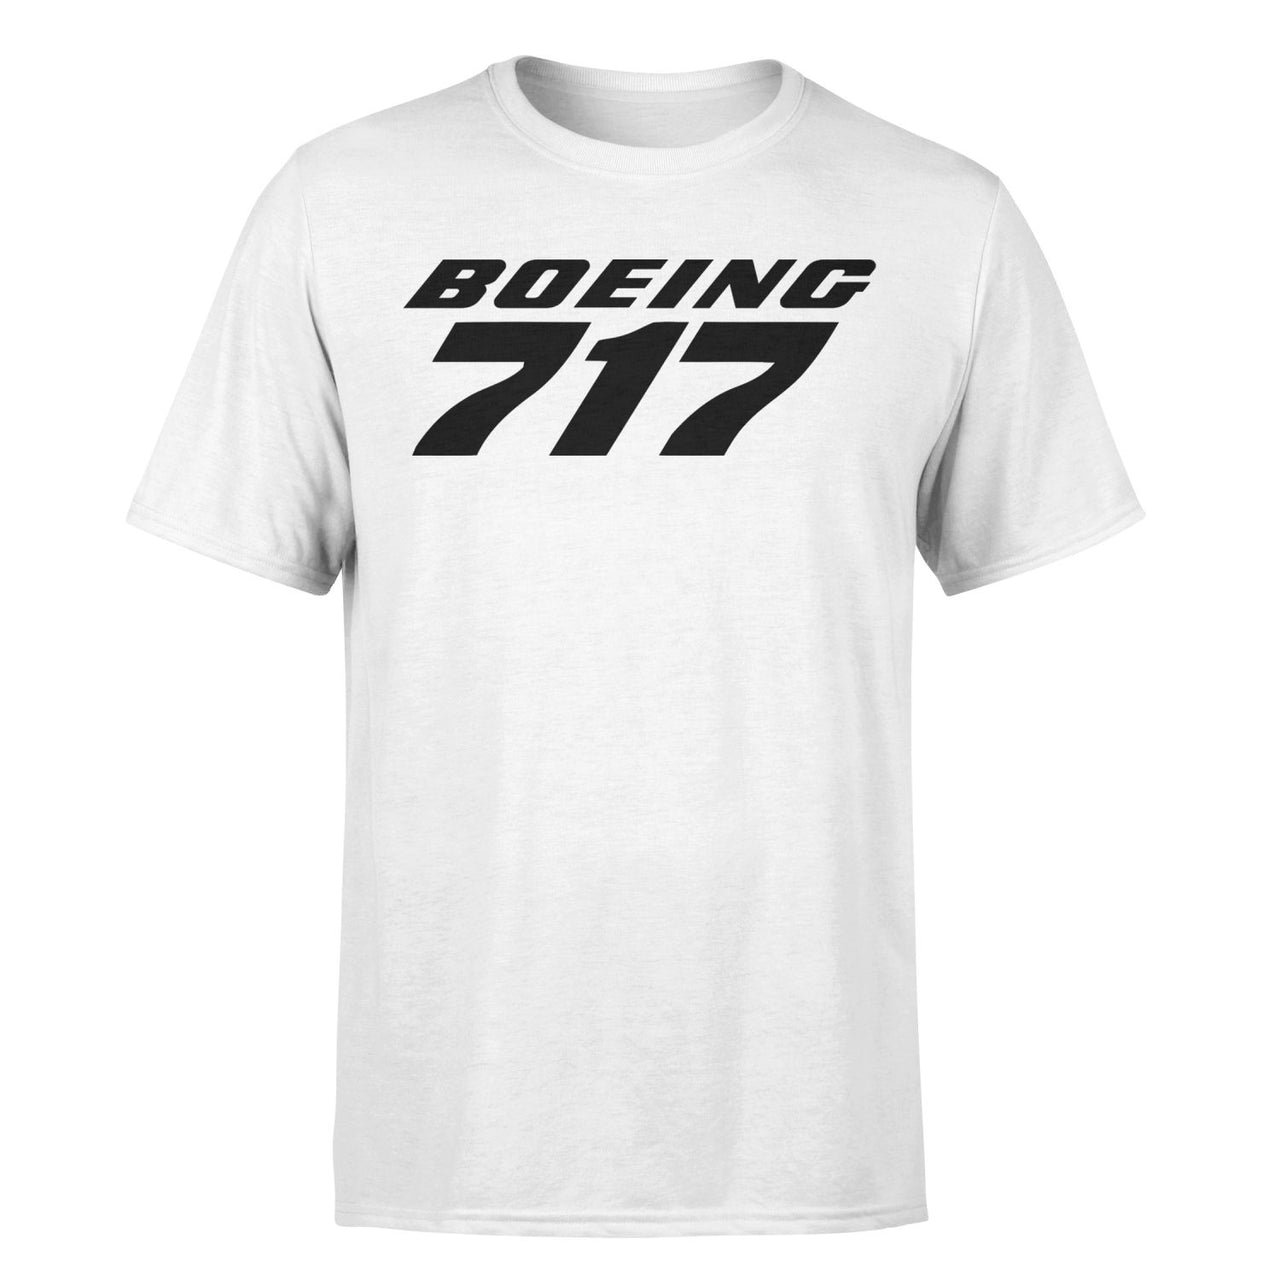 Boeing 717 & Text Designed T-Shirts